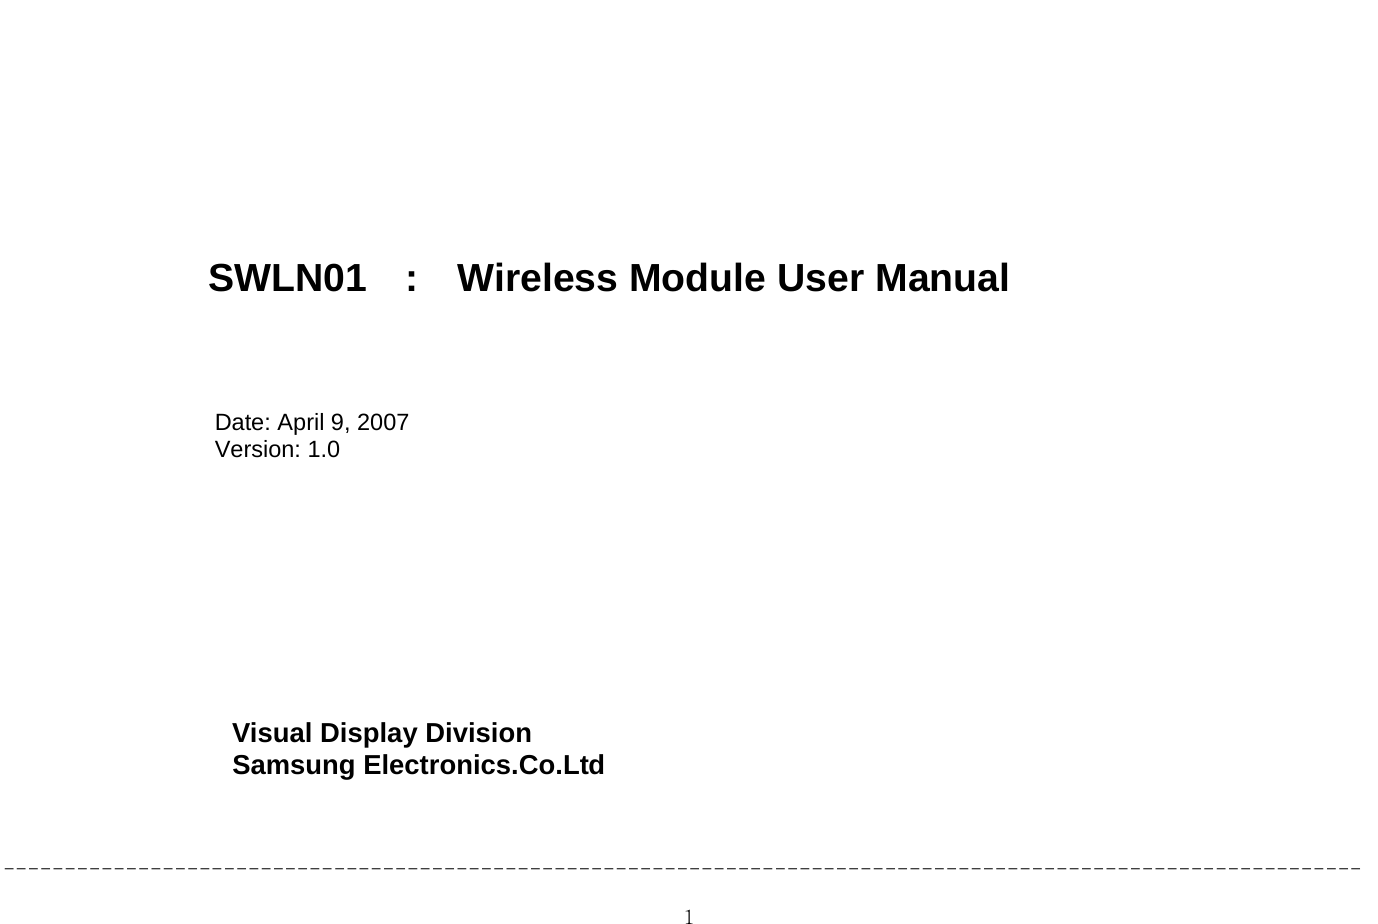  1           SWLN01  :  Wireless Module User Manual    Date: April 9, 2007 Version: 1.0           Visual Display Division                  Samsung Electronics.Co.Ltd                                               --------------------------------------------------------------------------------------------------------------- 